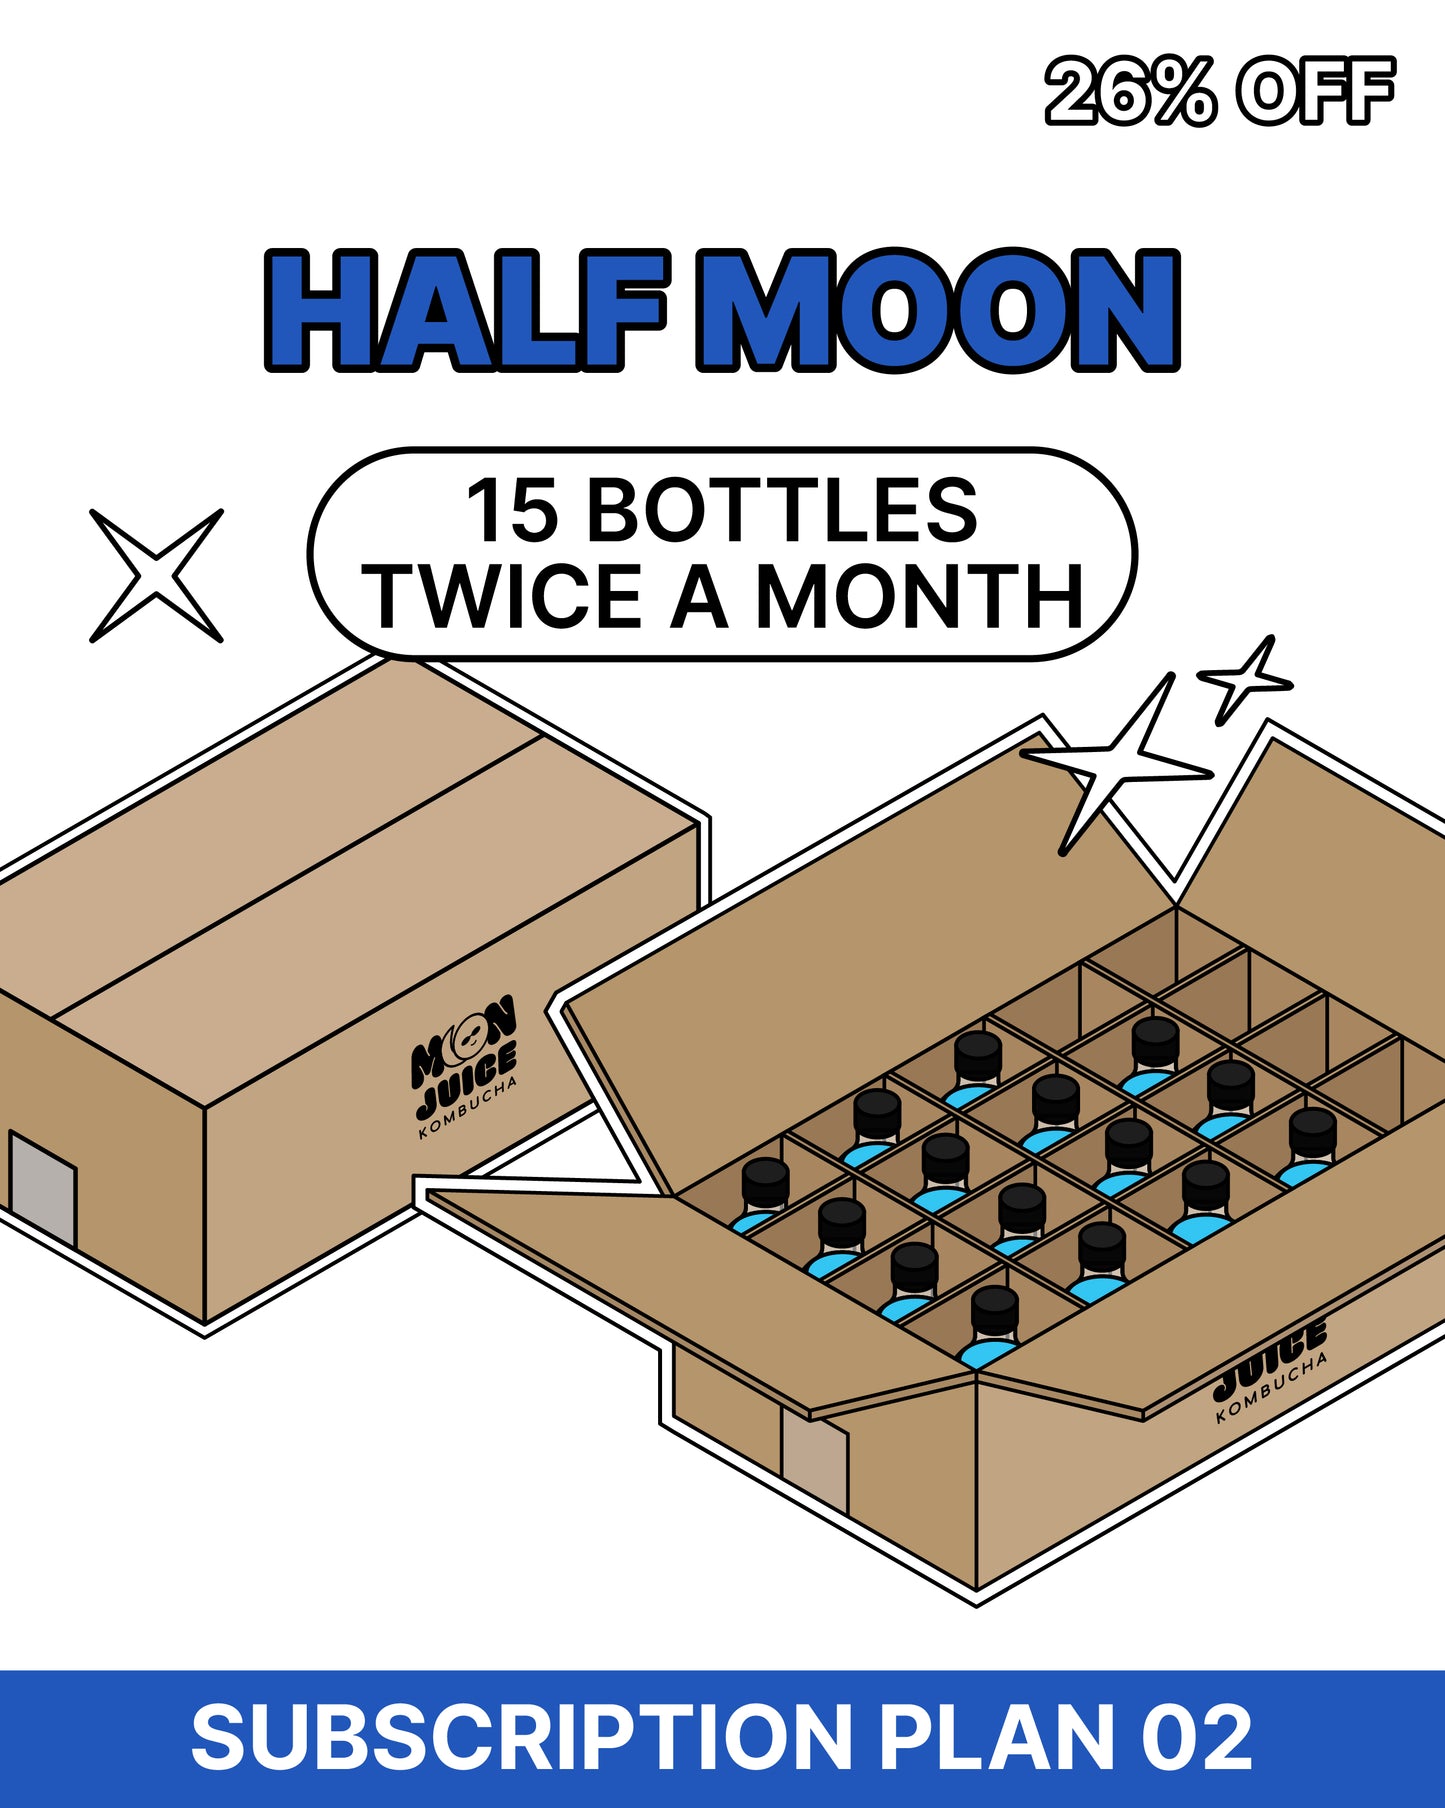 15 bottles twice a month